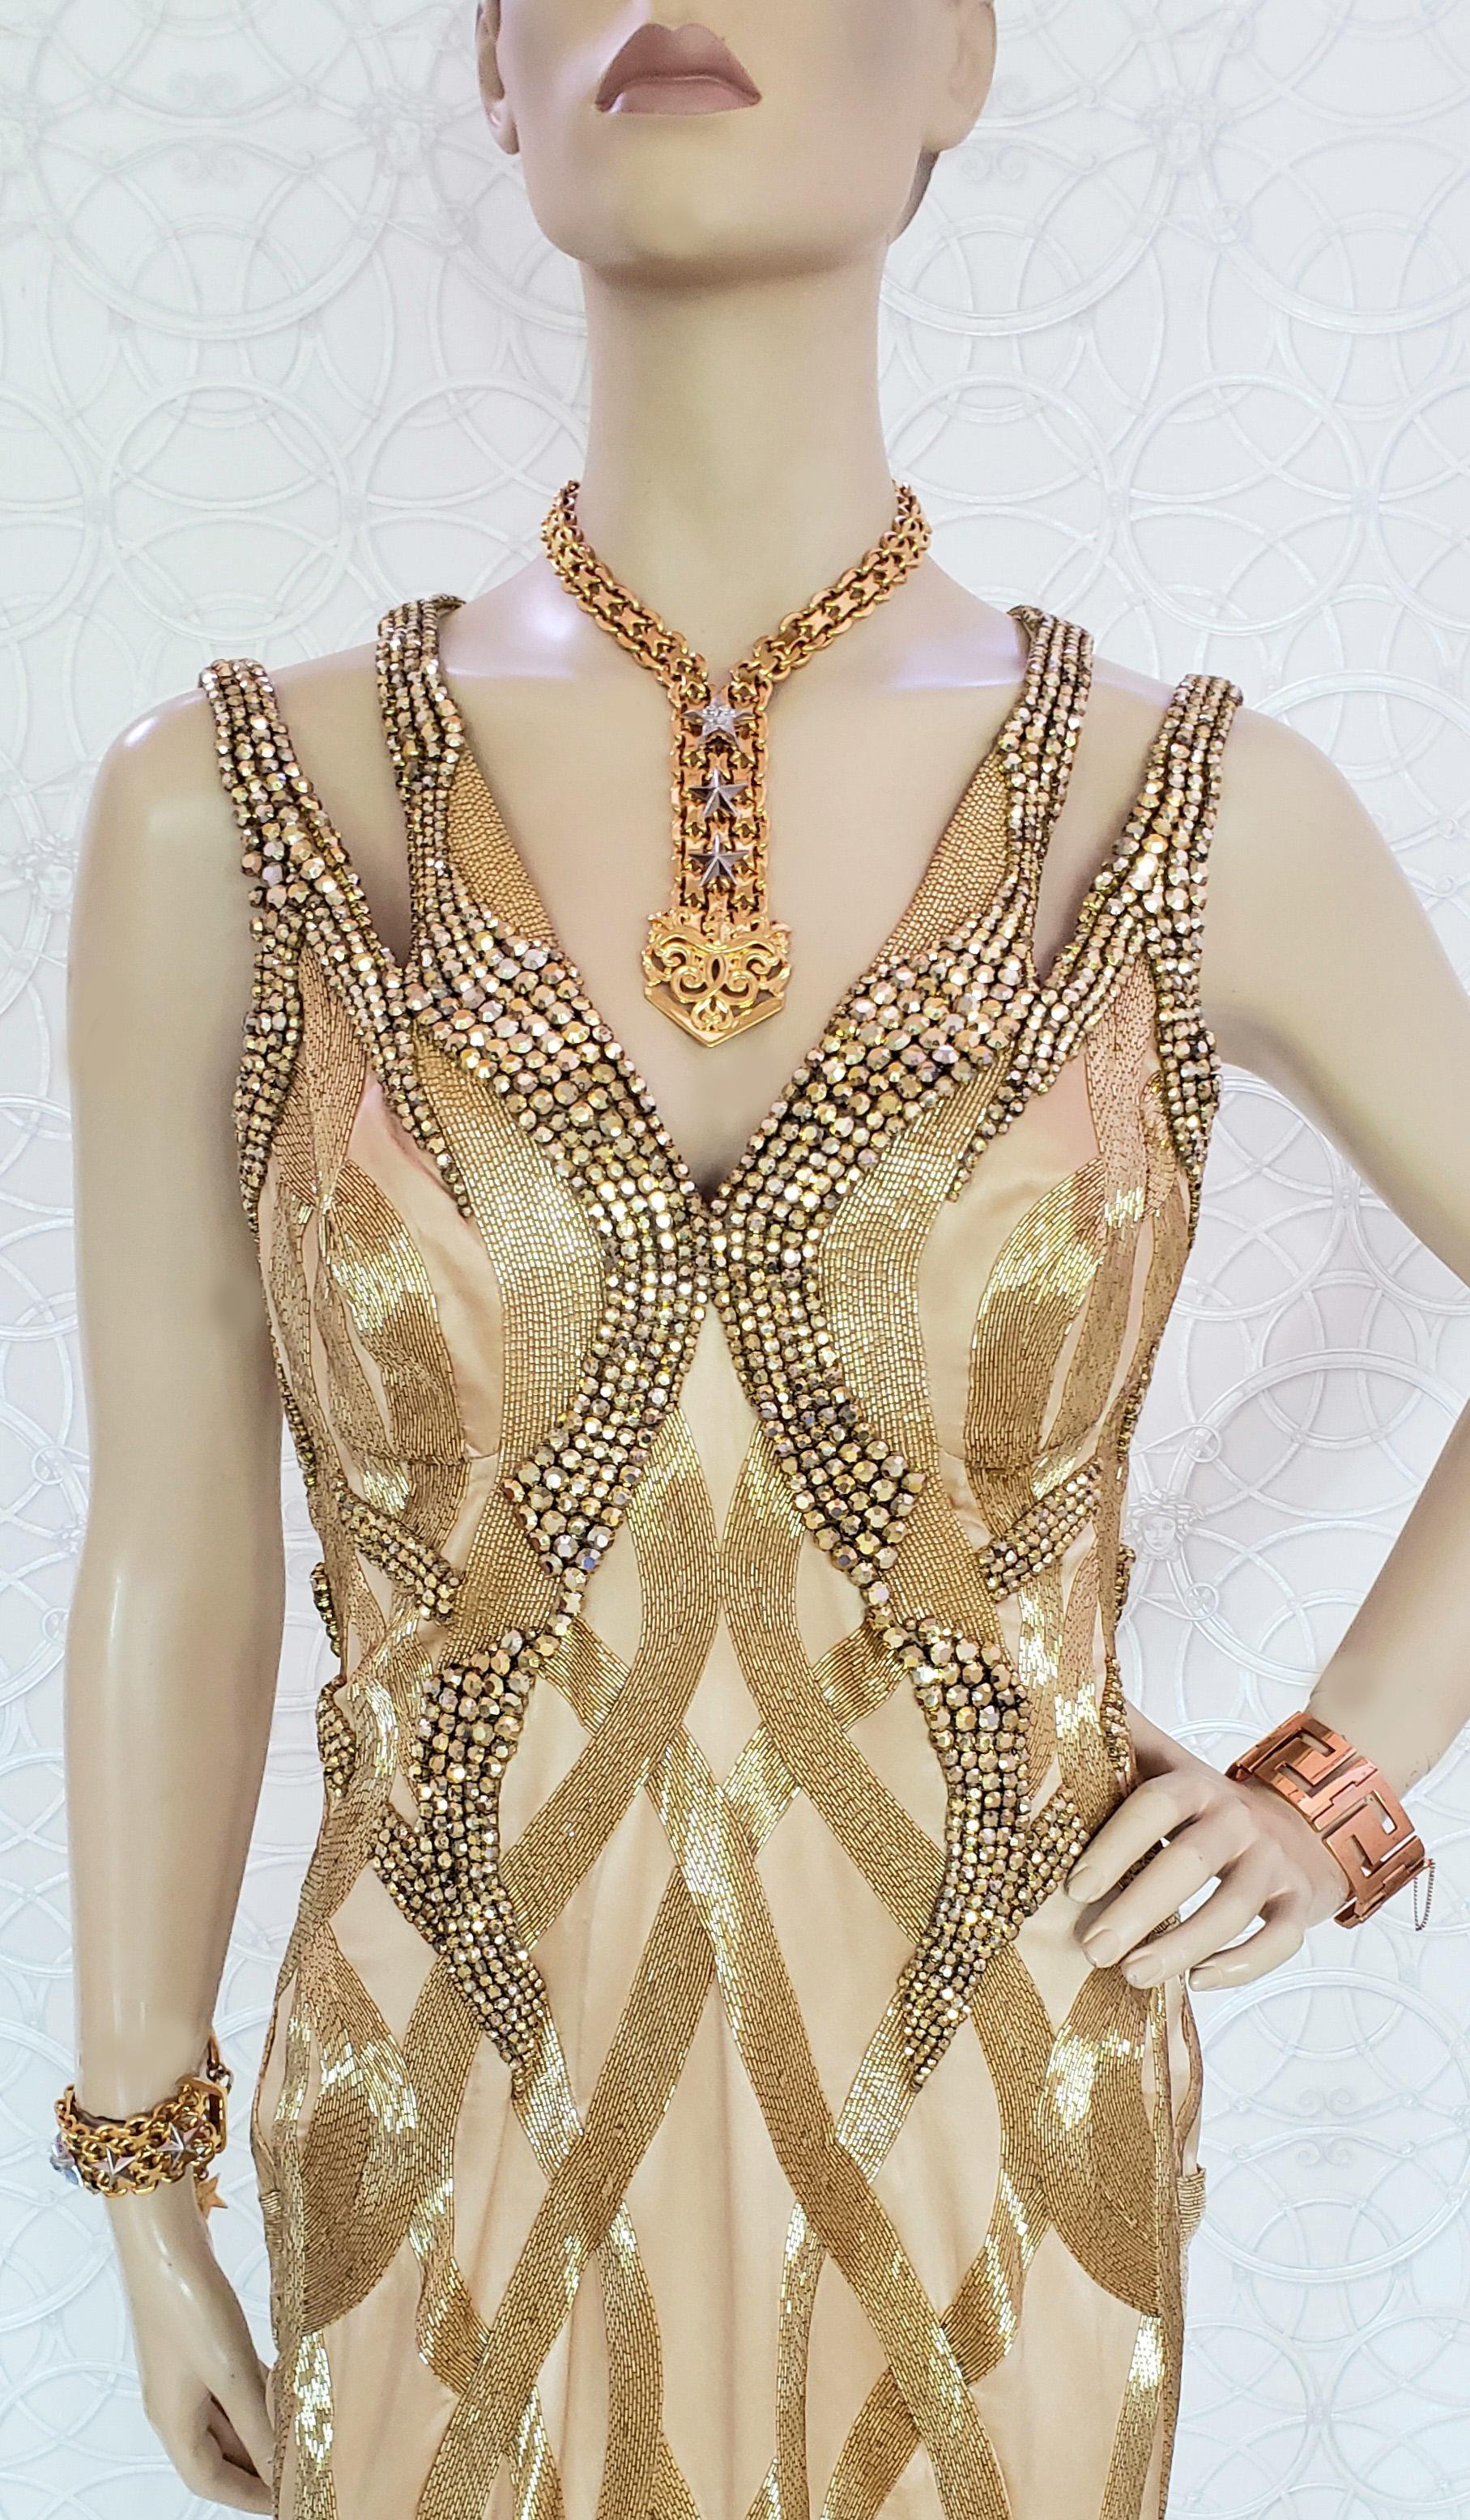 VERSACE GOLDEN EMBELLISHED w/ SWAROWSKI STONES GOWN  DRESS as seen on Irina  For Sale 1